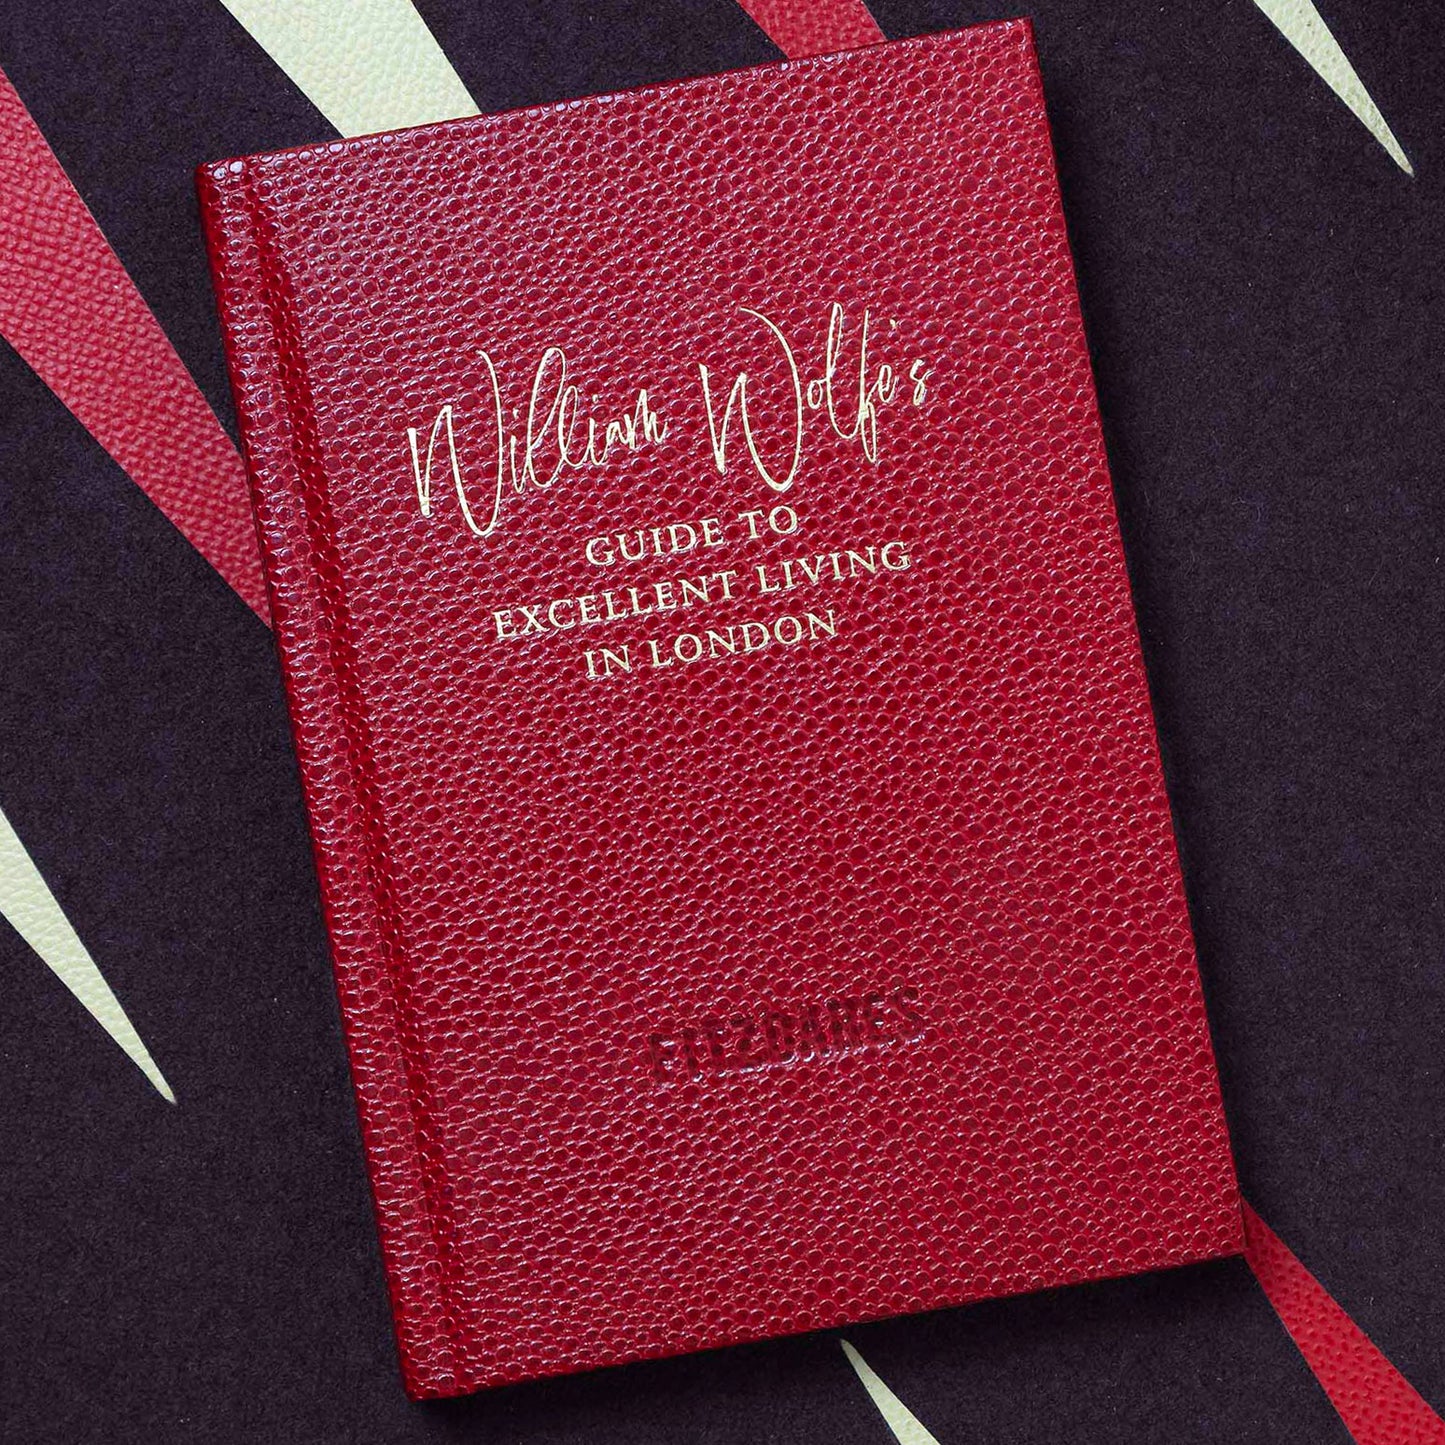 *William Wolfe’s Guide To Excellent Living In London